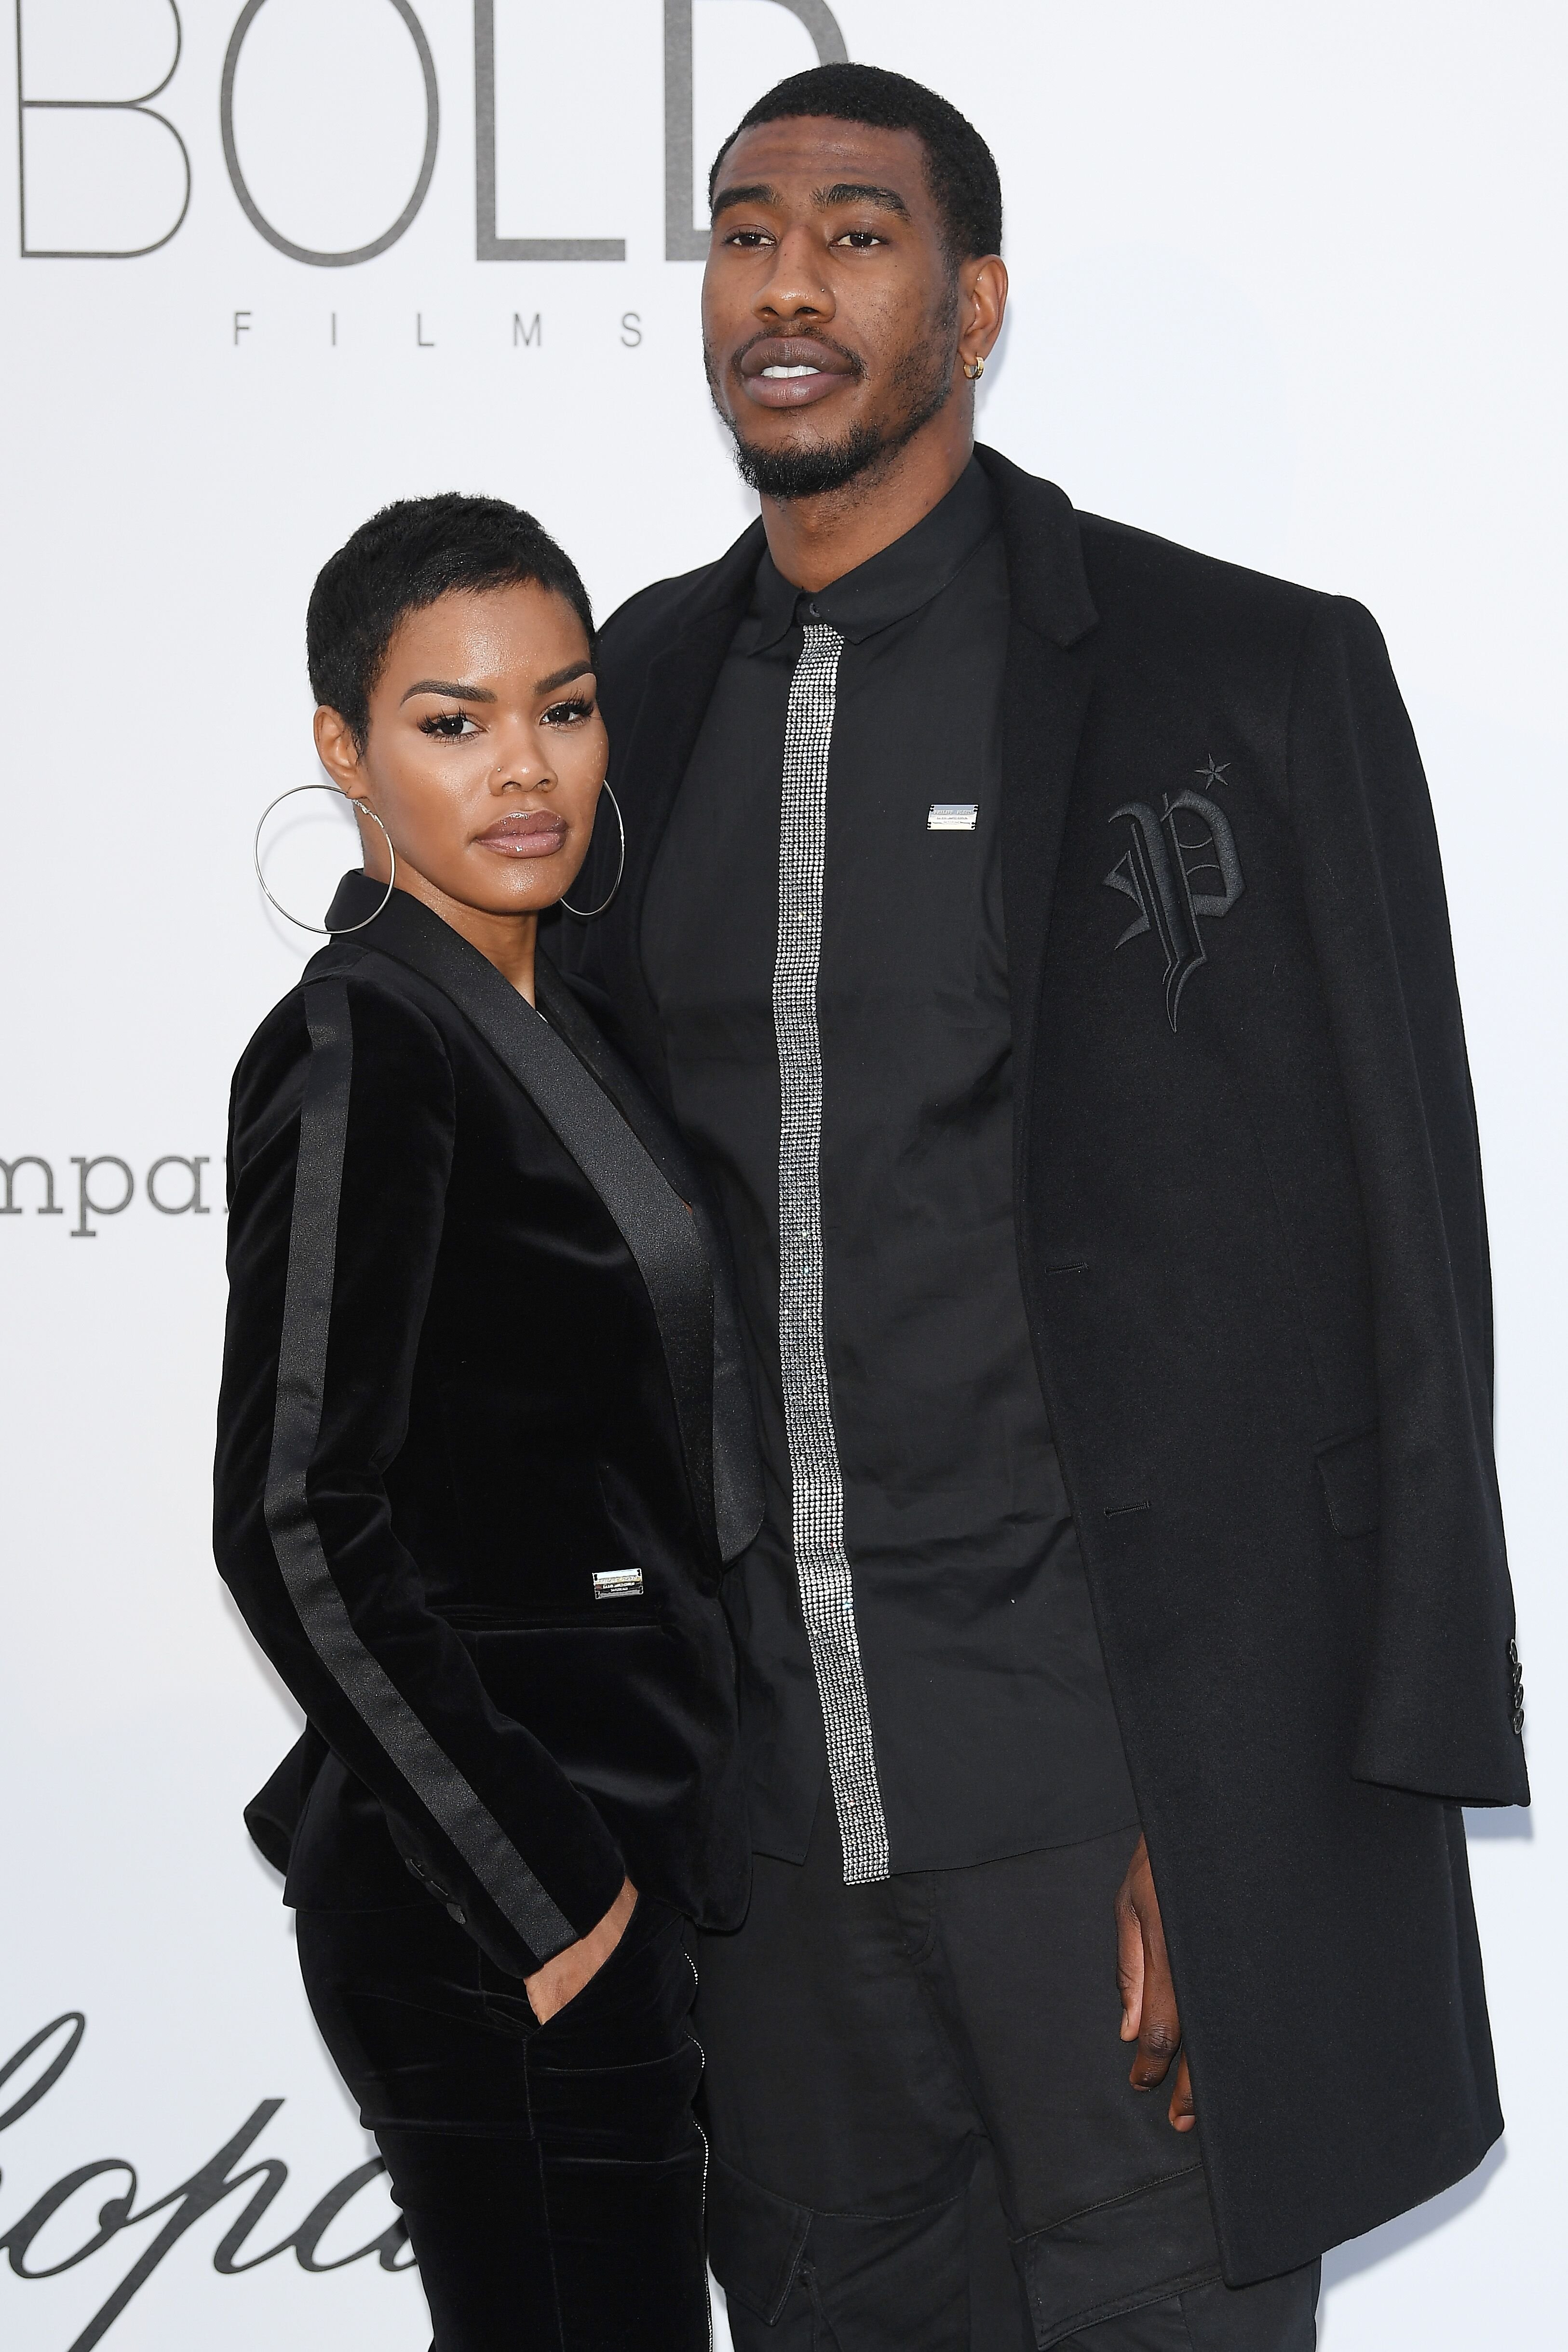 Teyana Taylor and Iman Shumpert arrive at the amfAR Gala Cannes 2018 at Hotel du Cap-Eden-Roc on May 17, 2018 | Photo: Getty Images